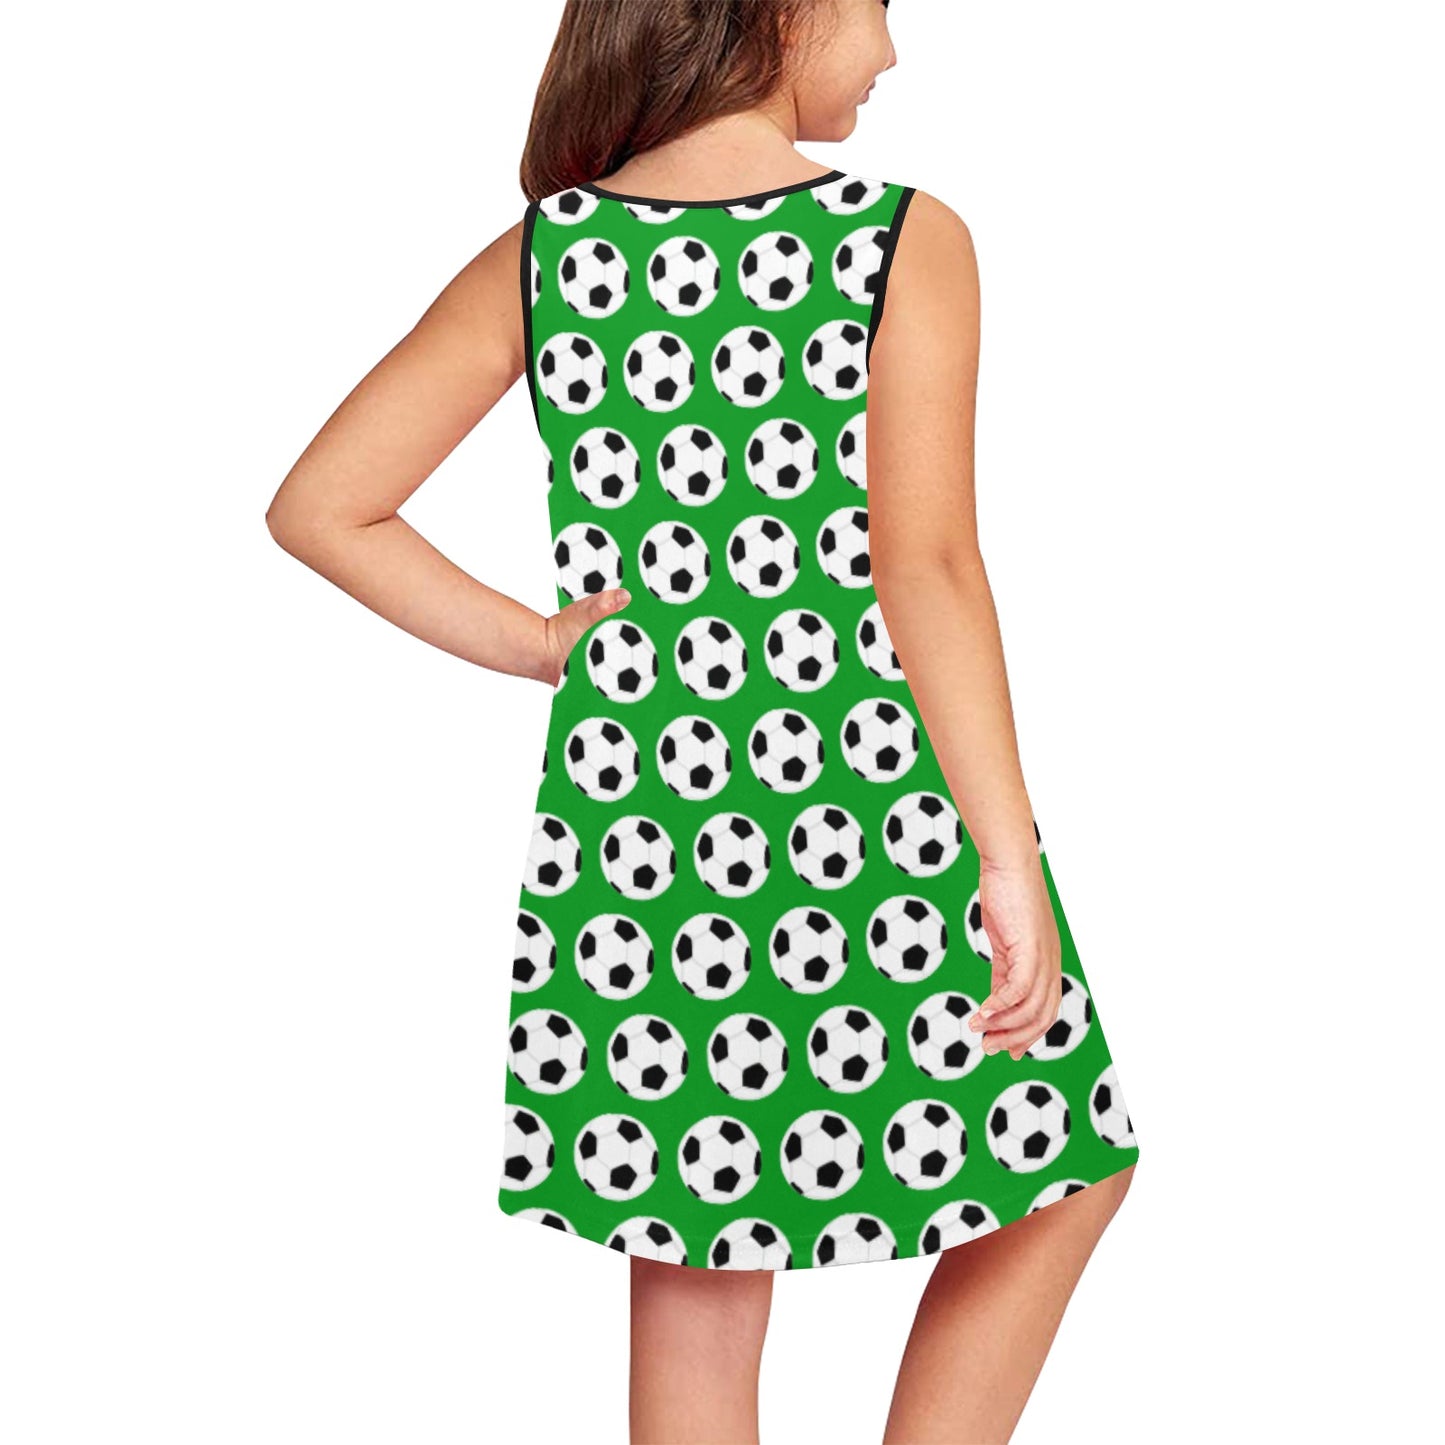 Active Cutie Soccer Kid's Dress (PICK YOUR SKIN TONE)